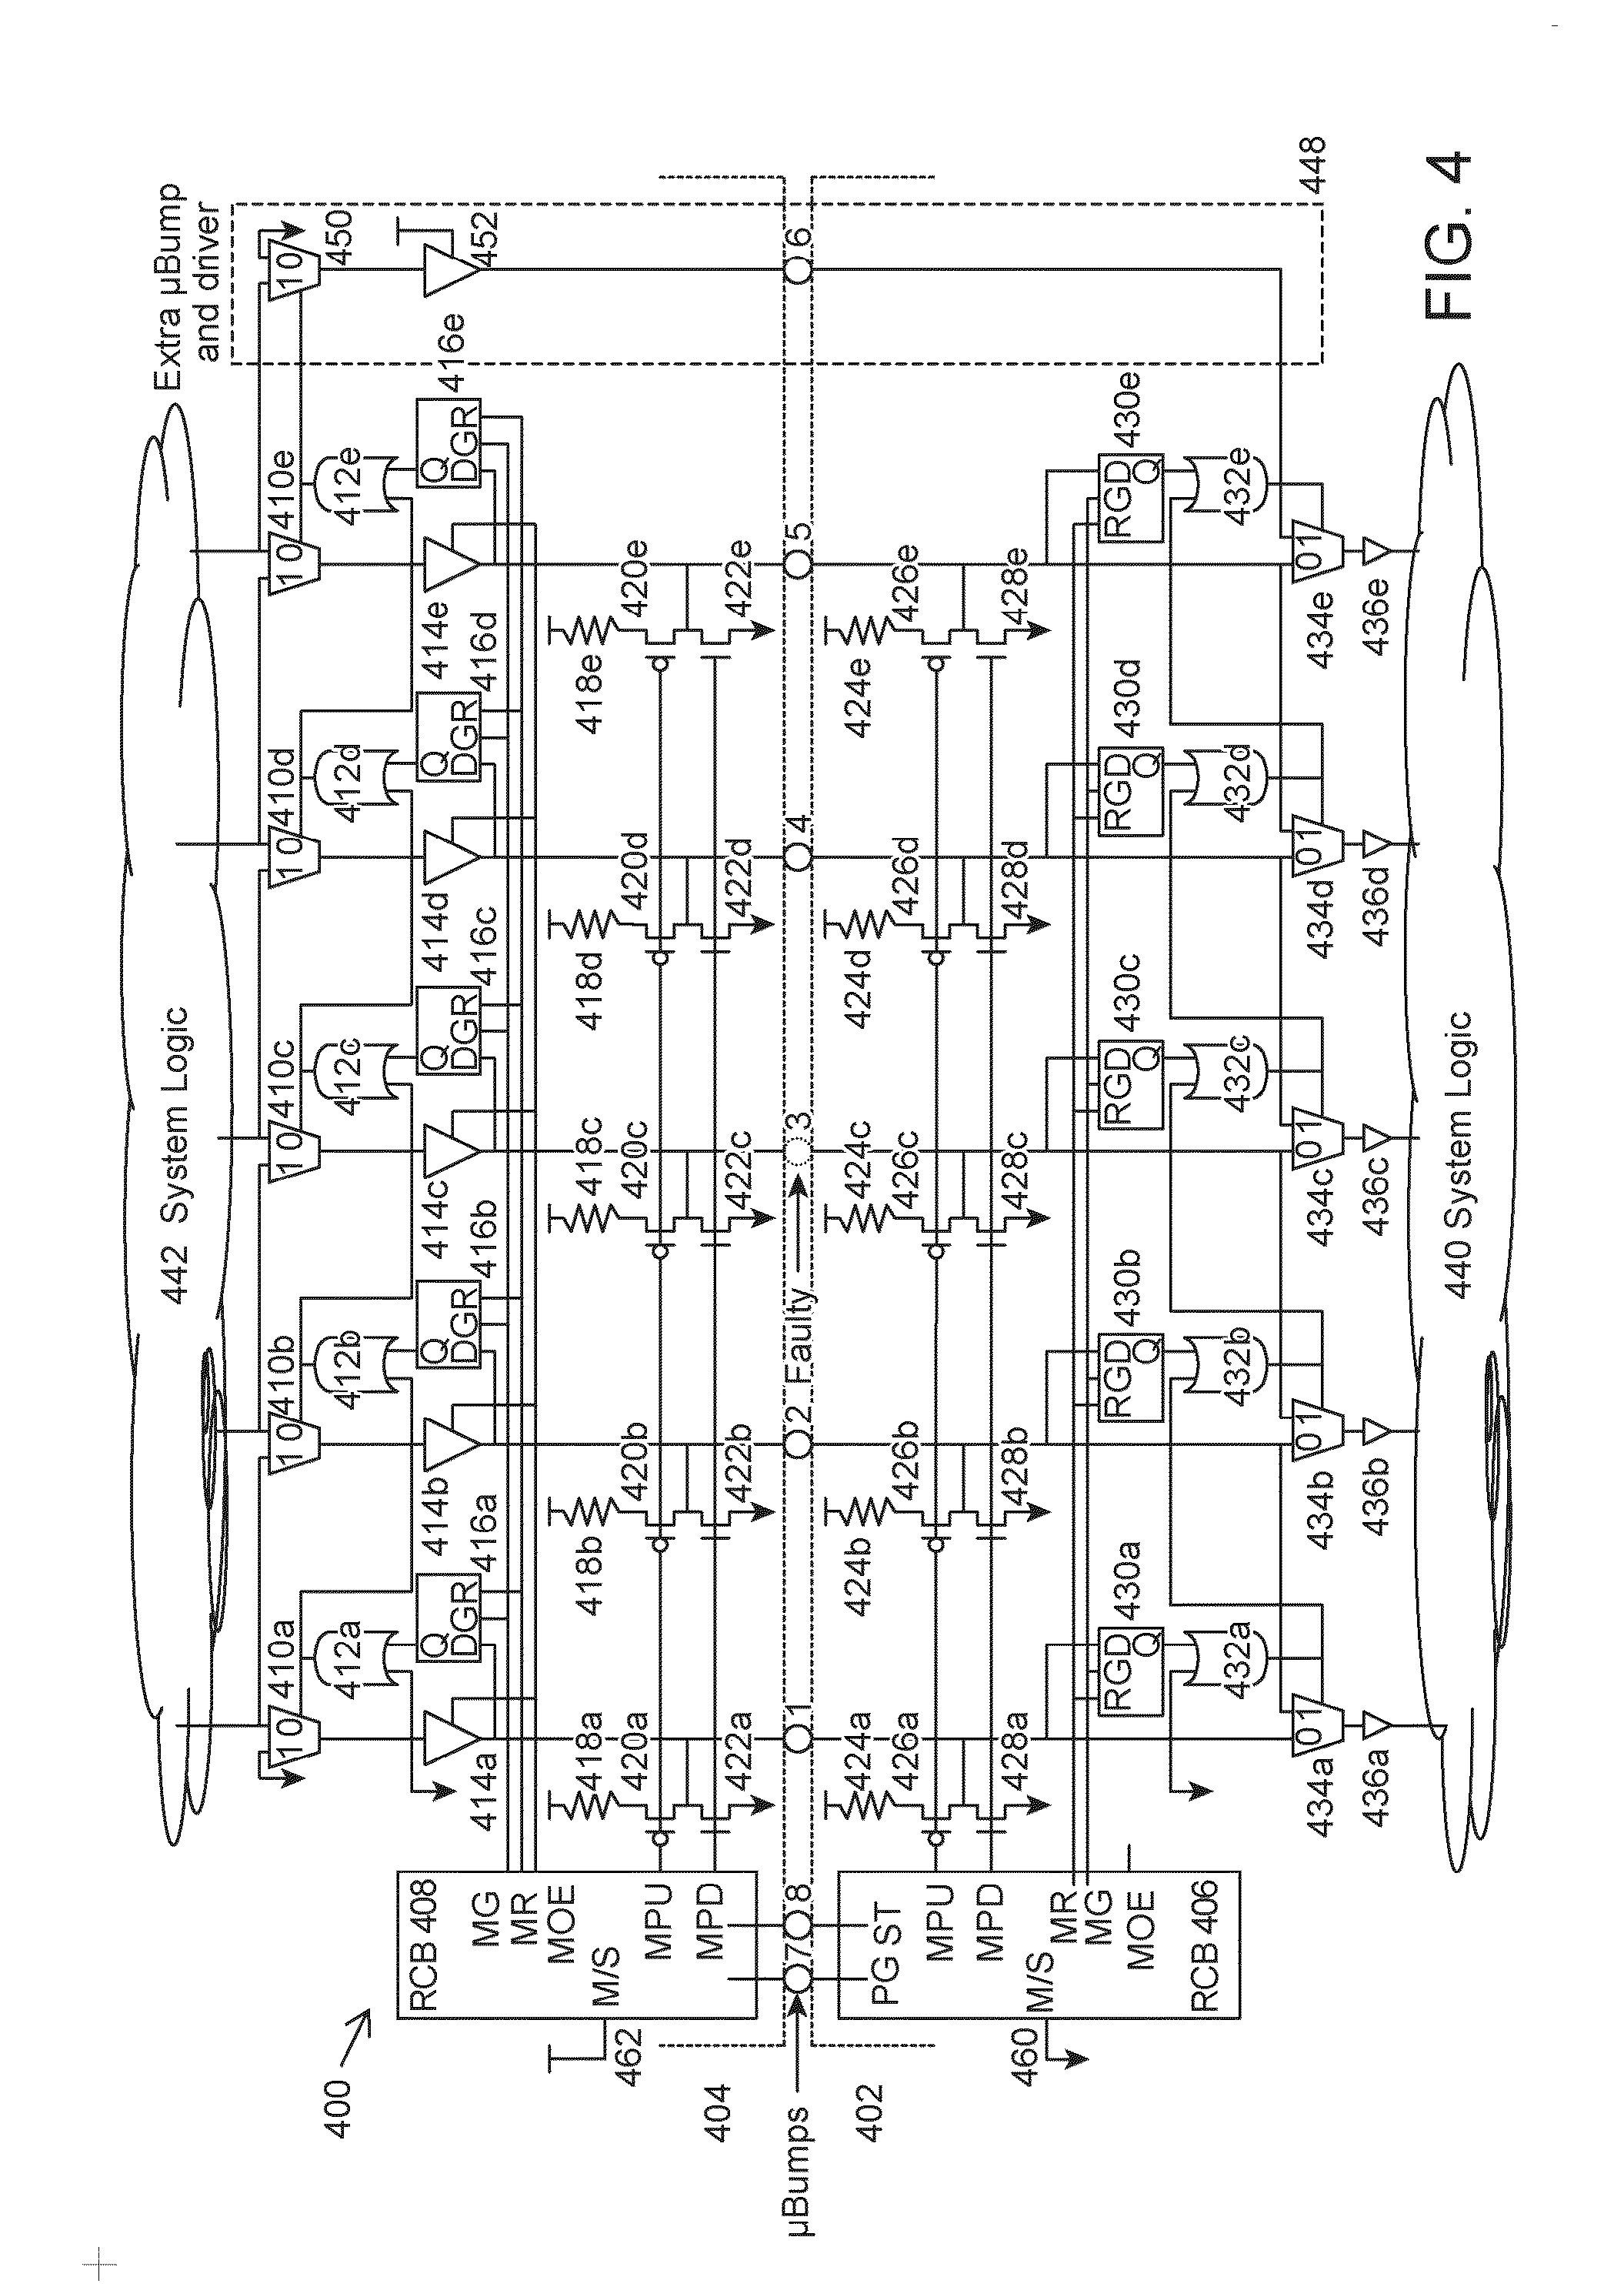 Method and apparatus for self-annealing multi-die interconnect redundancy control